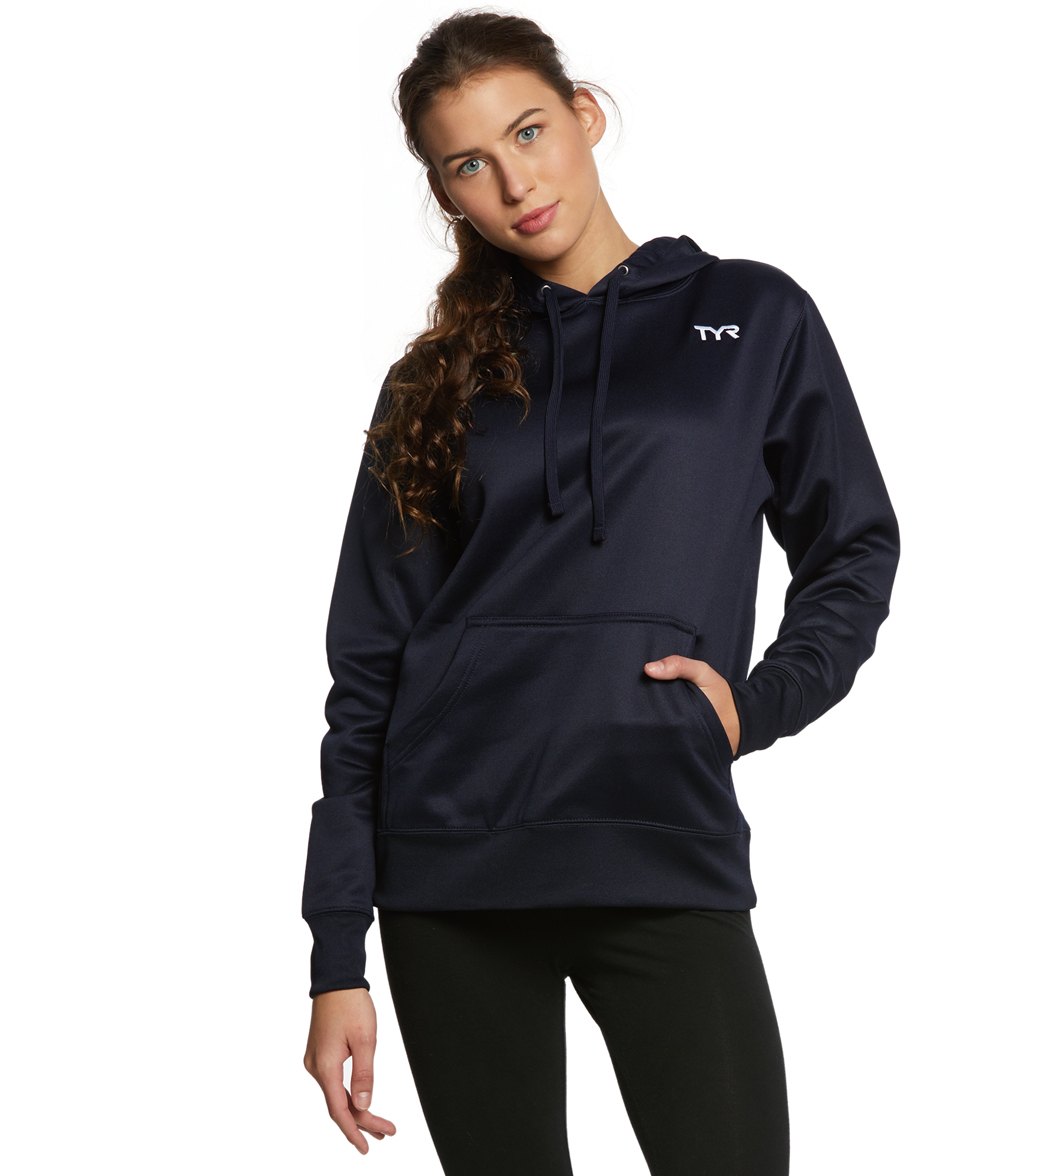 TYR Women's Alliance Pullover Hoodie - Navy Large Cotton/Polyester - Swimoutlet.com